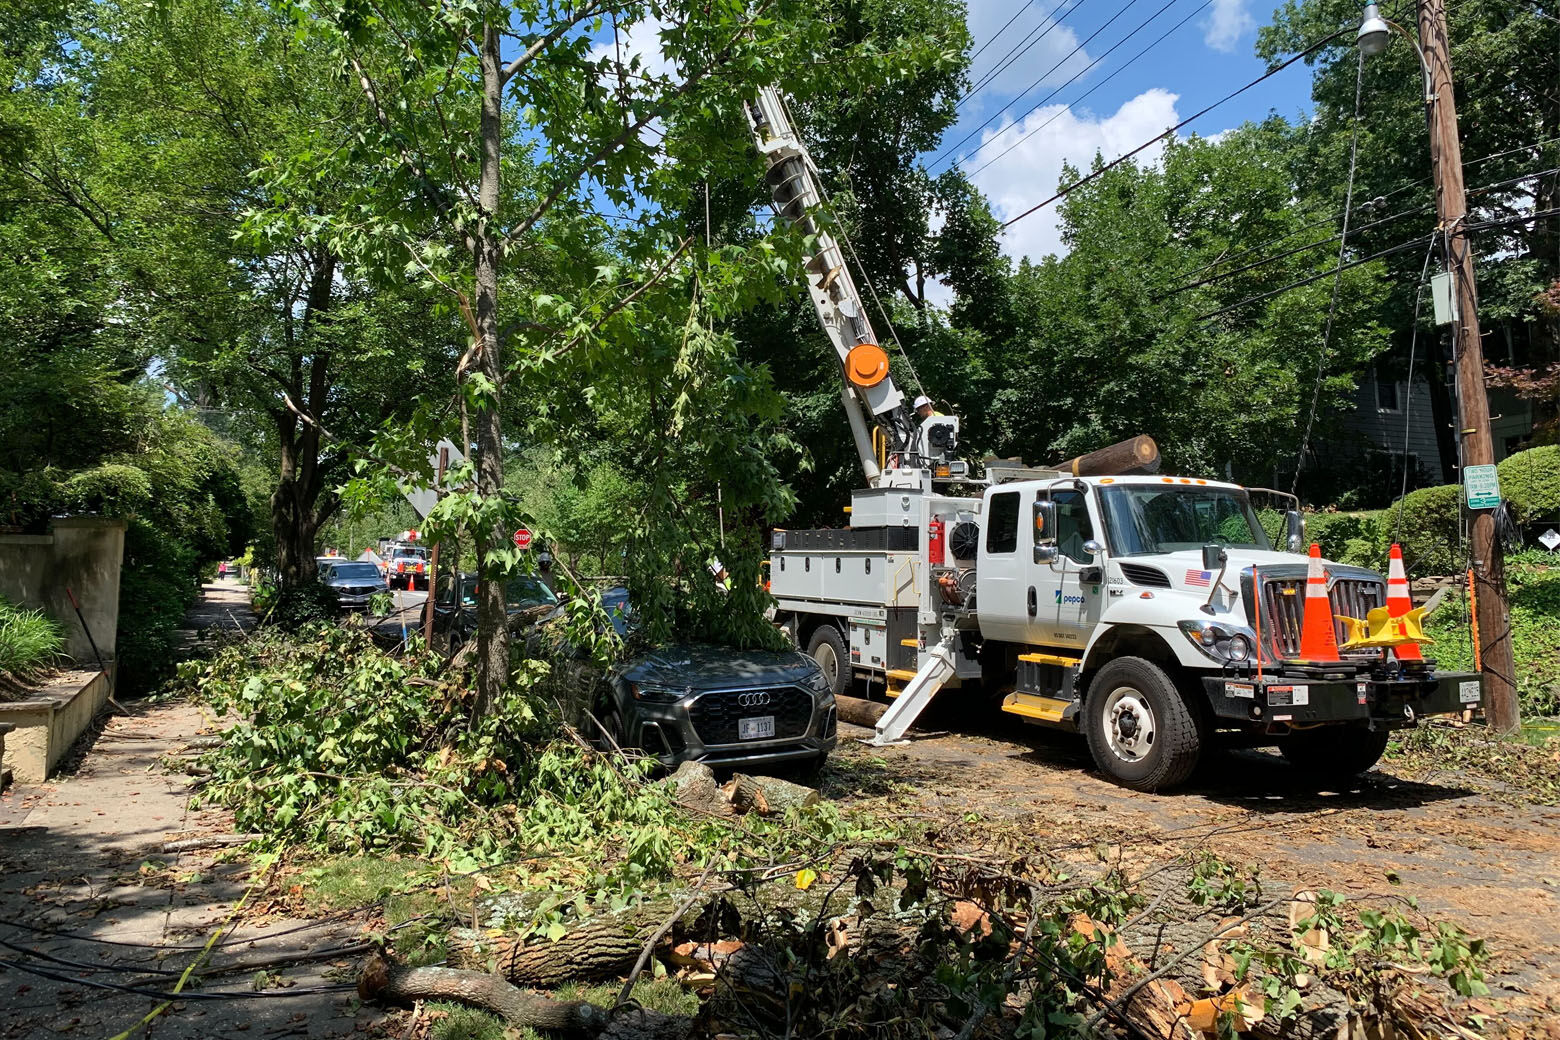 The D.C. region continues to recover after a severe storm ripped through the area on Saturday, toppling trees, and knocking out power for thousands across the area. (WTOP/Cheynne Corin)